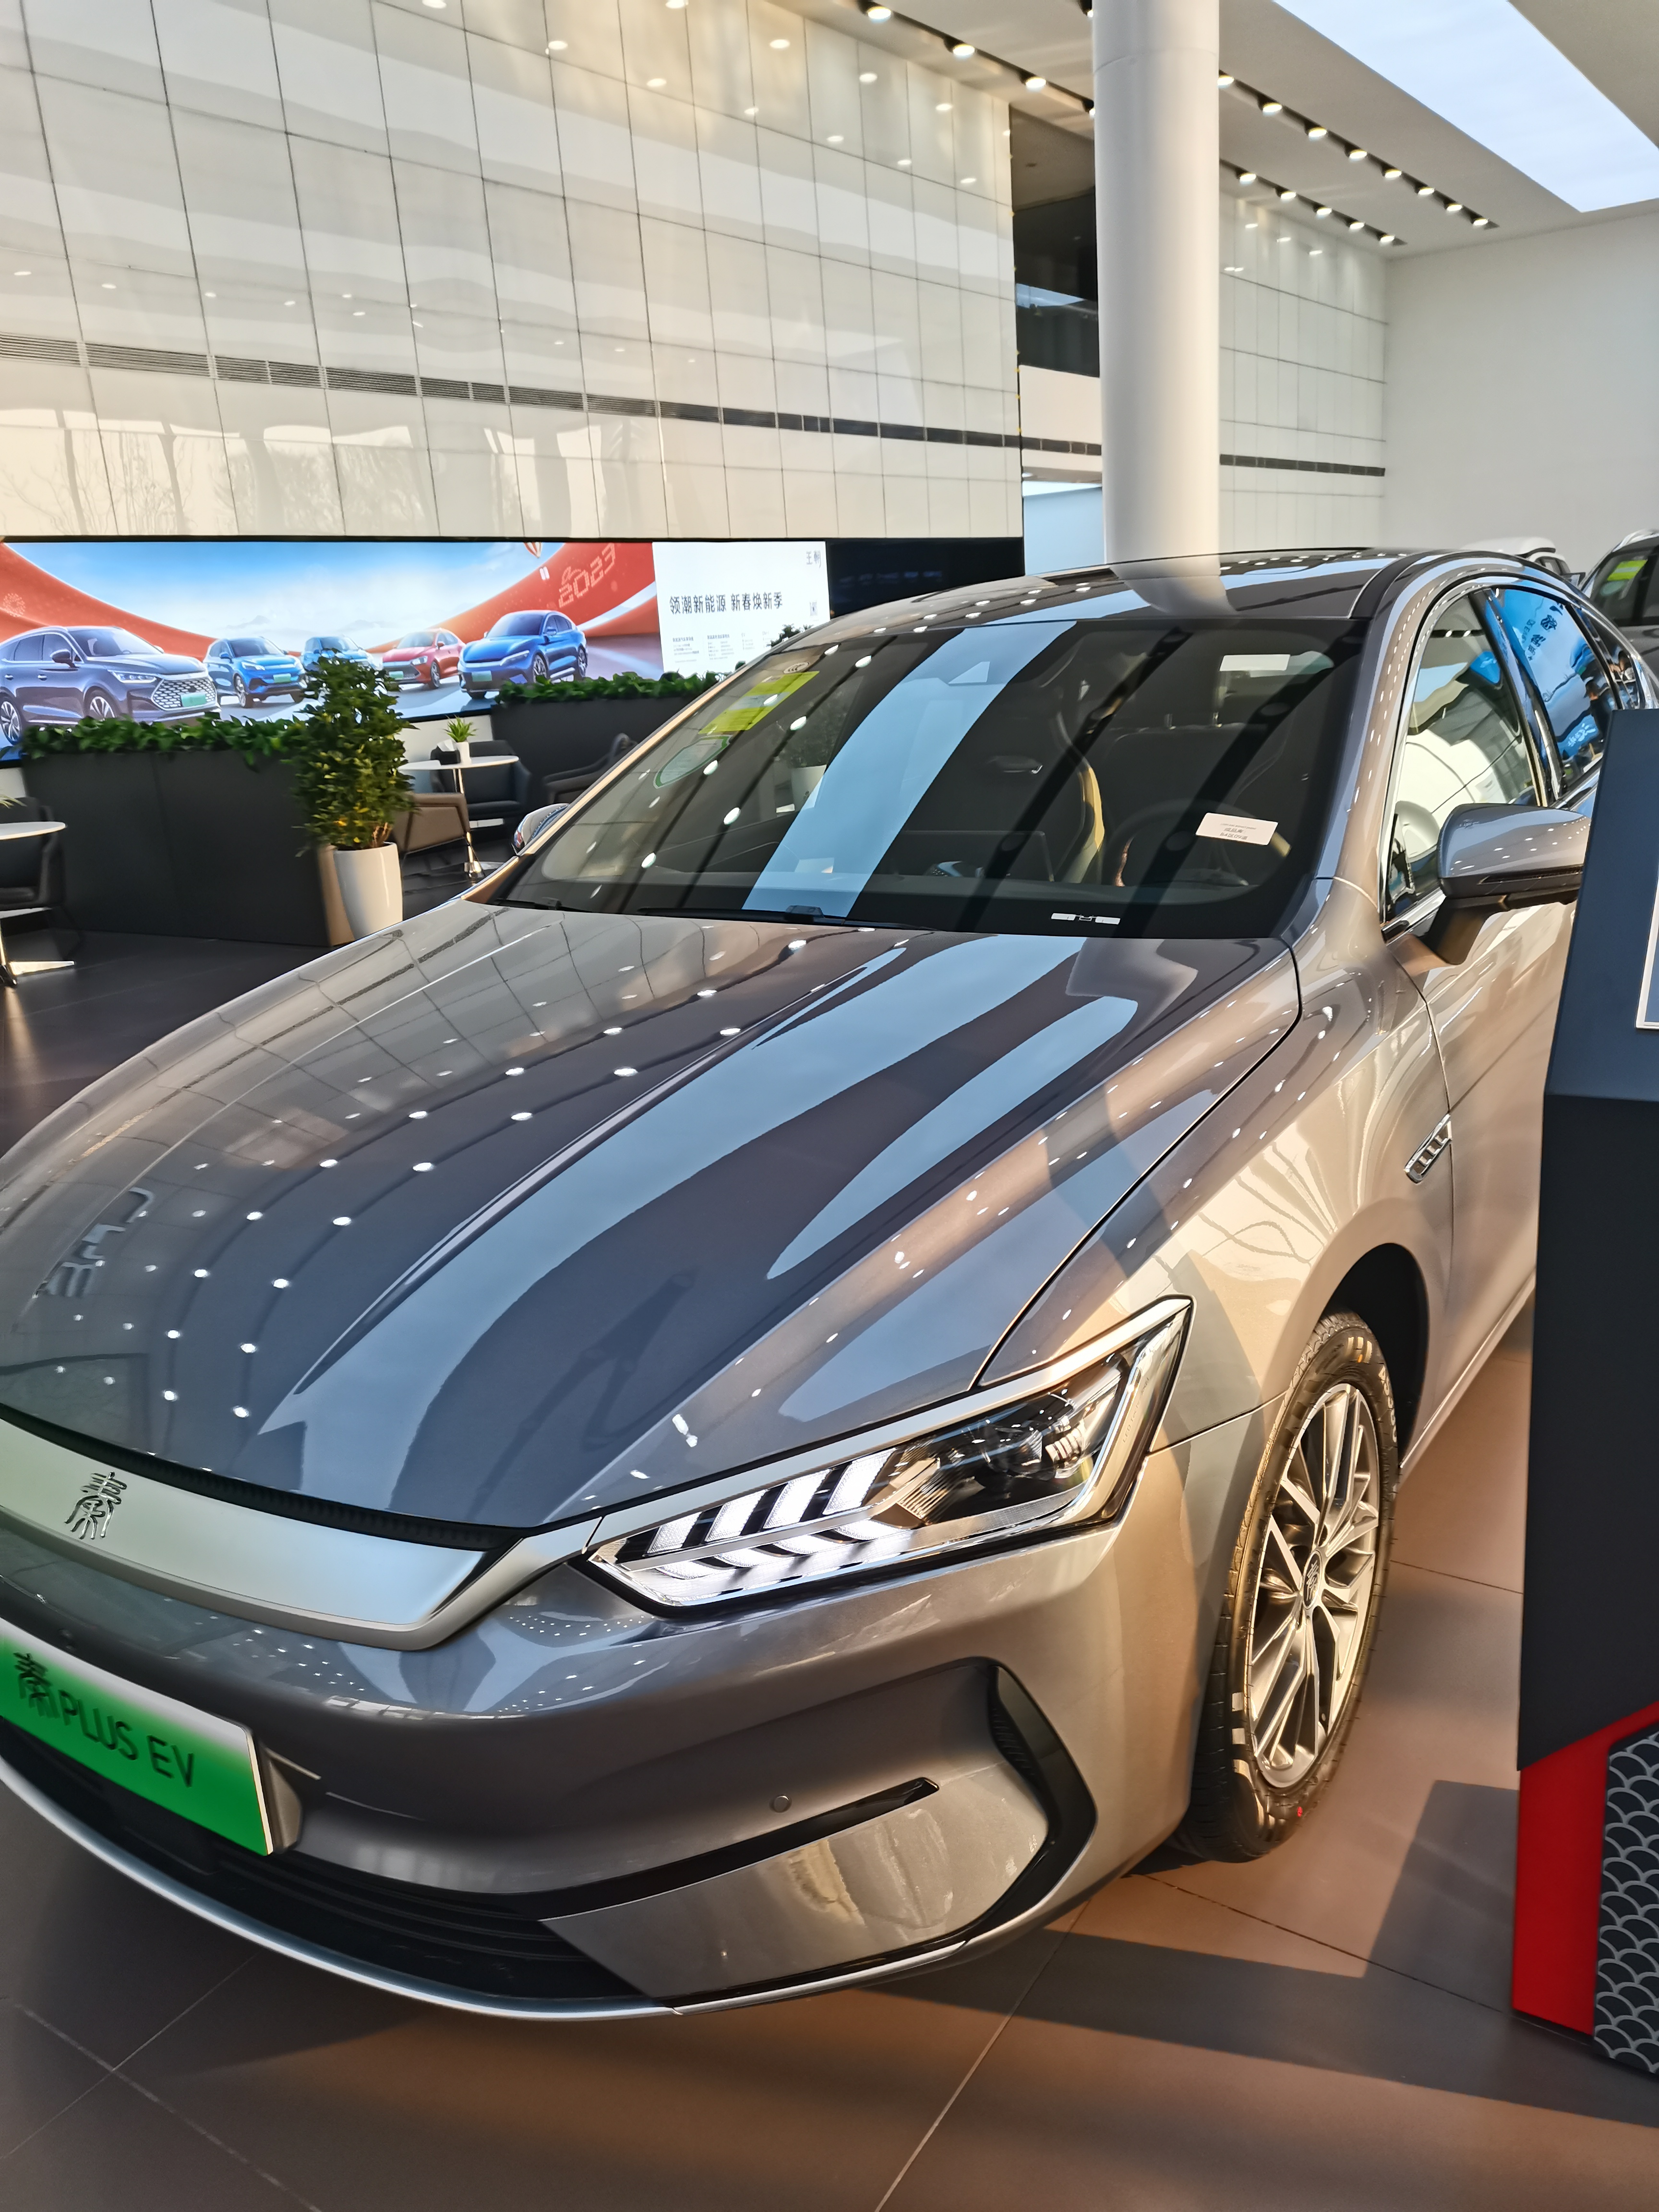 BYD  Used car/secondhand car  export for the Qin plus ev parameter configuration table